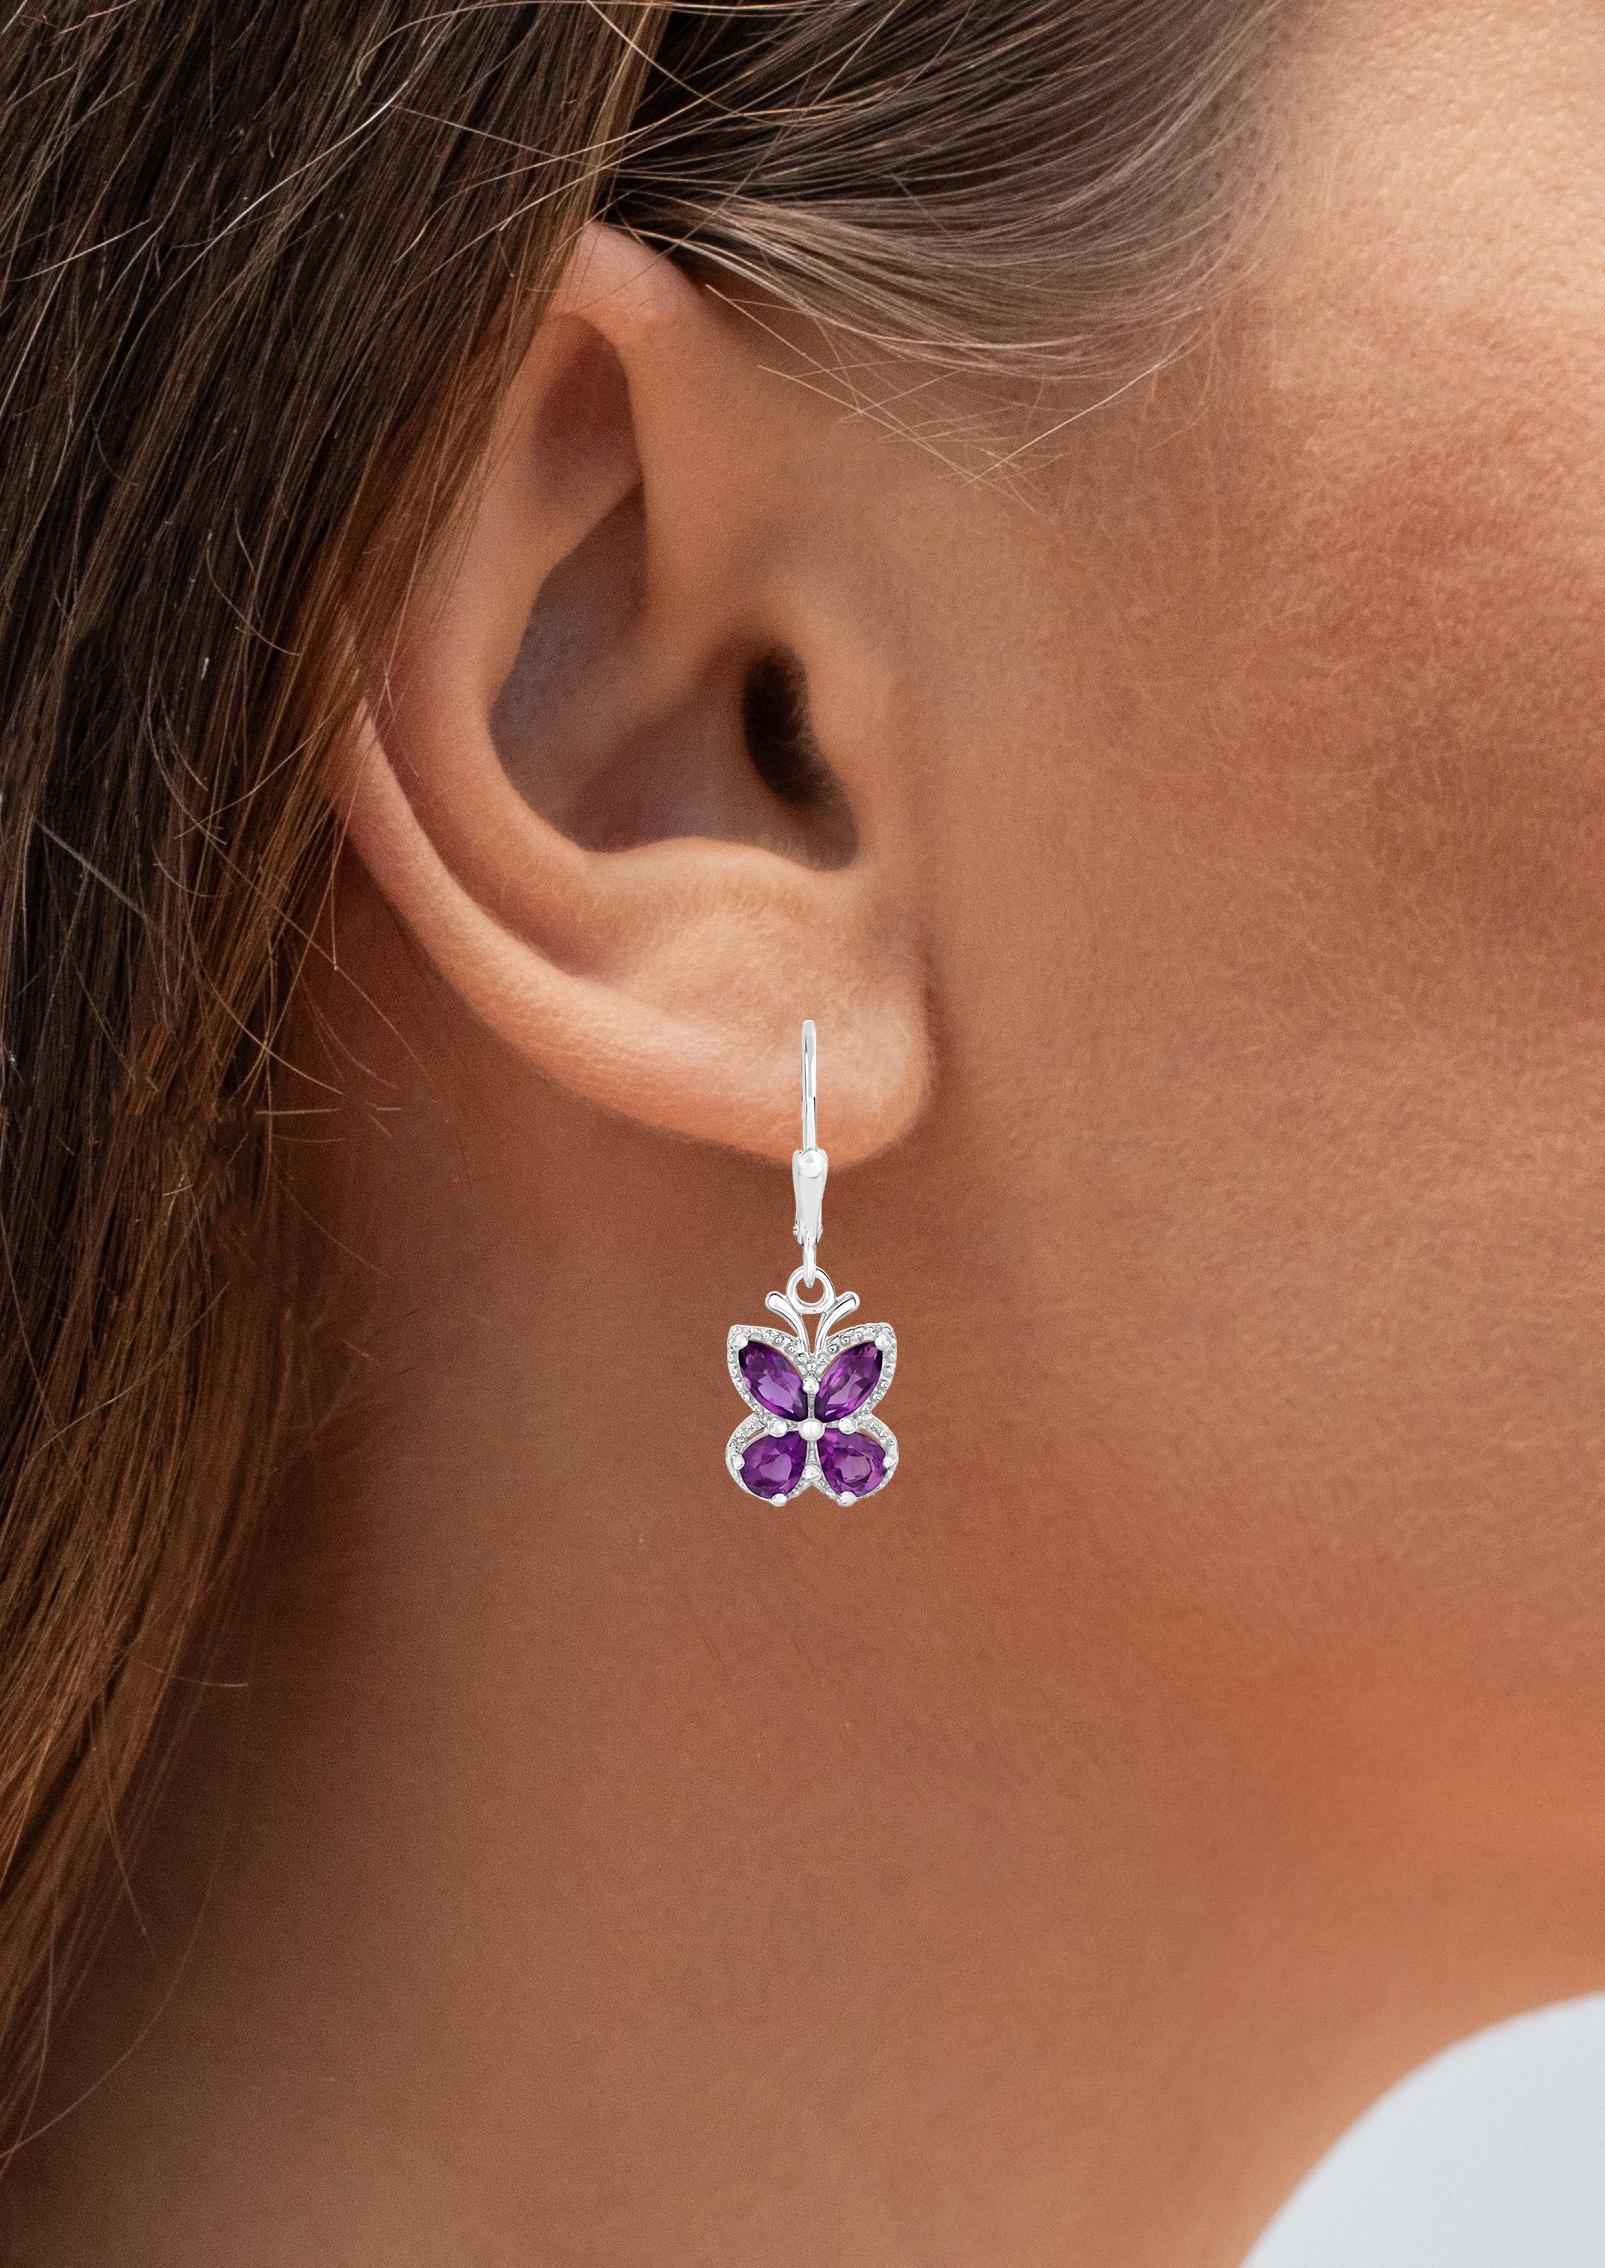 Contemporary Amethyst Butterfly Earrings 2.12 Carats Rhodium Plated Sterling Silver For Sale